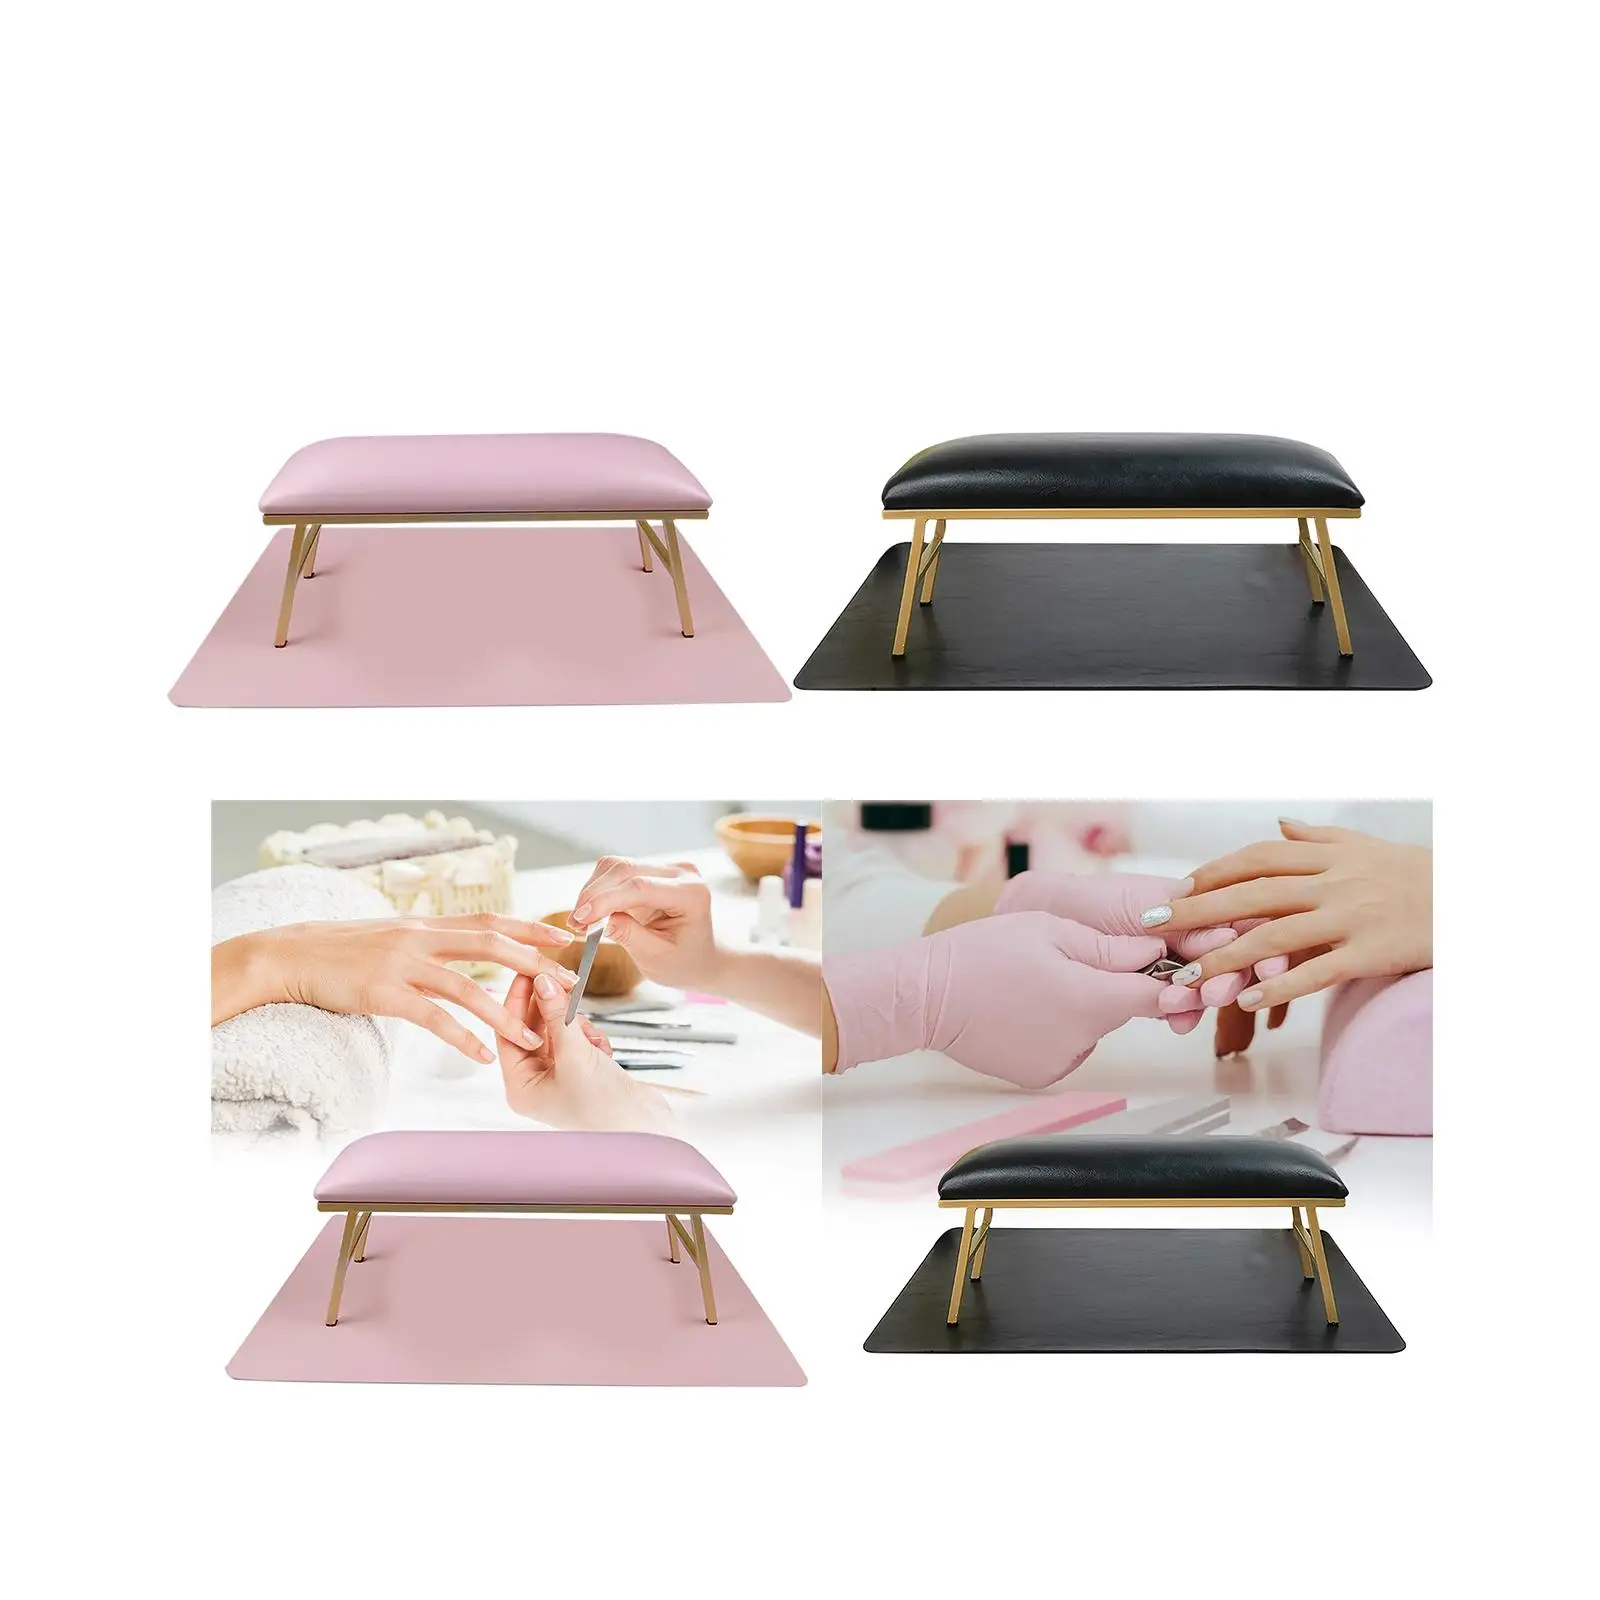 Nail Pillow and Mat Desk Table Soft Professional PU Leather Accessory Arm Rest for Nails for Salon Manicurist Arm Nail Art Nail